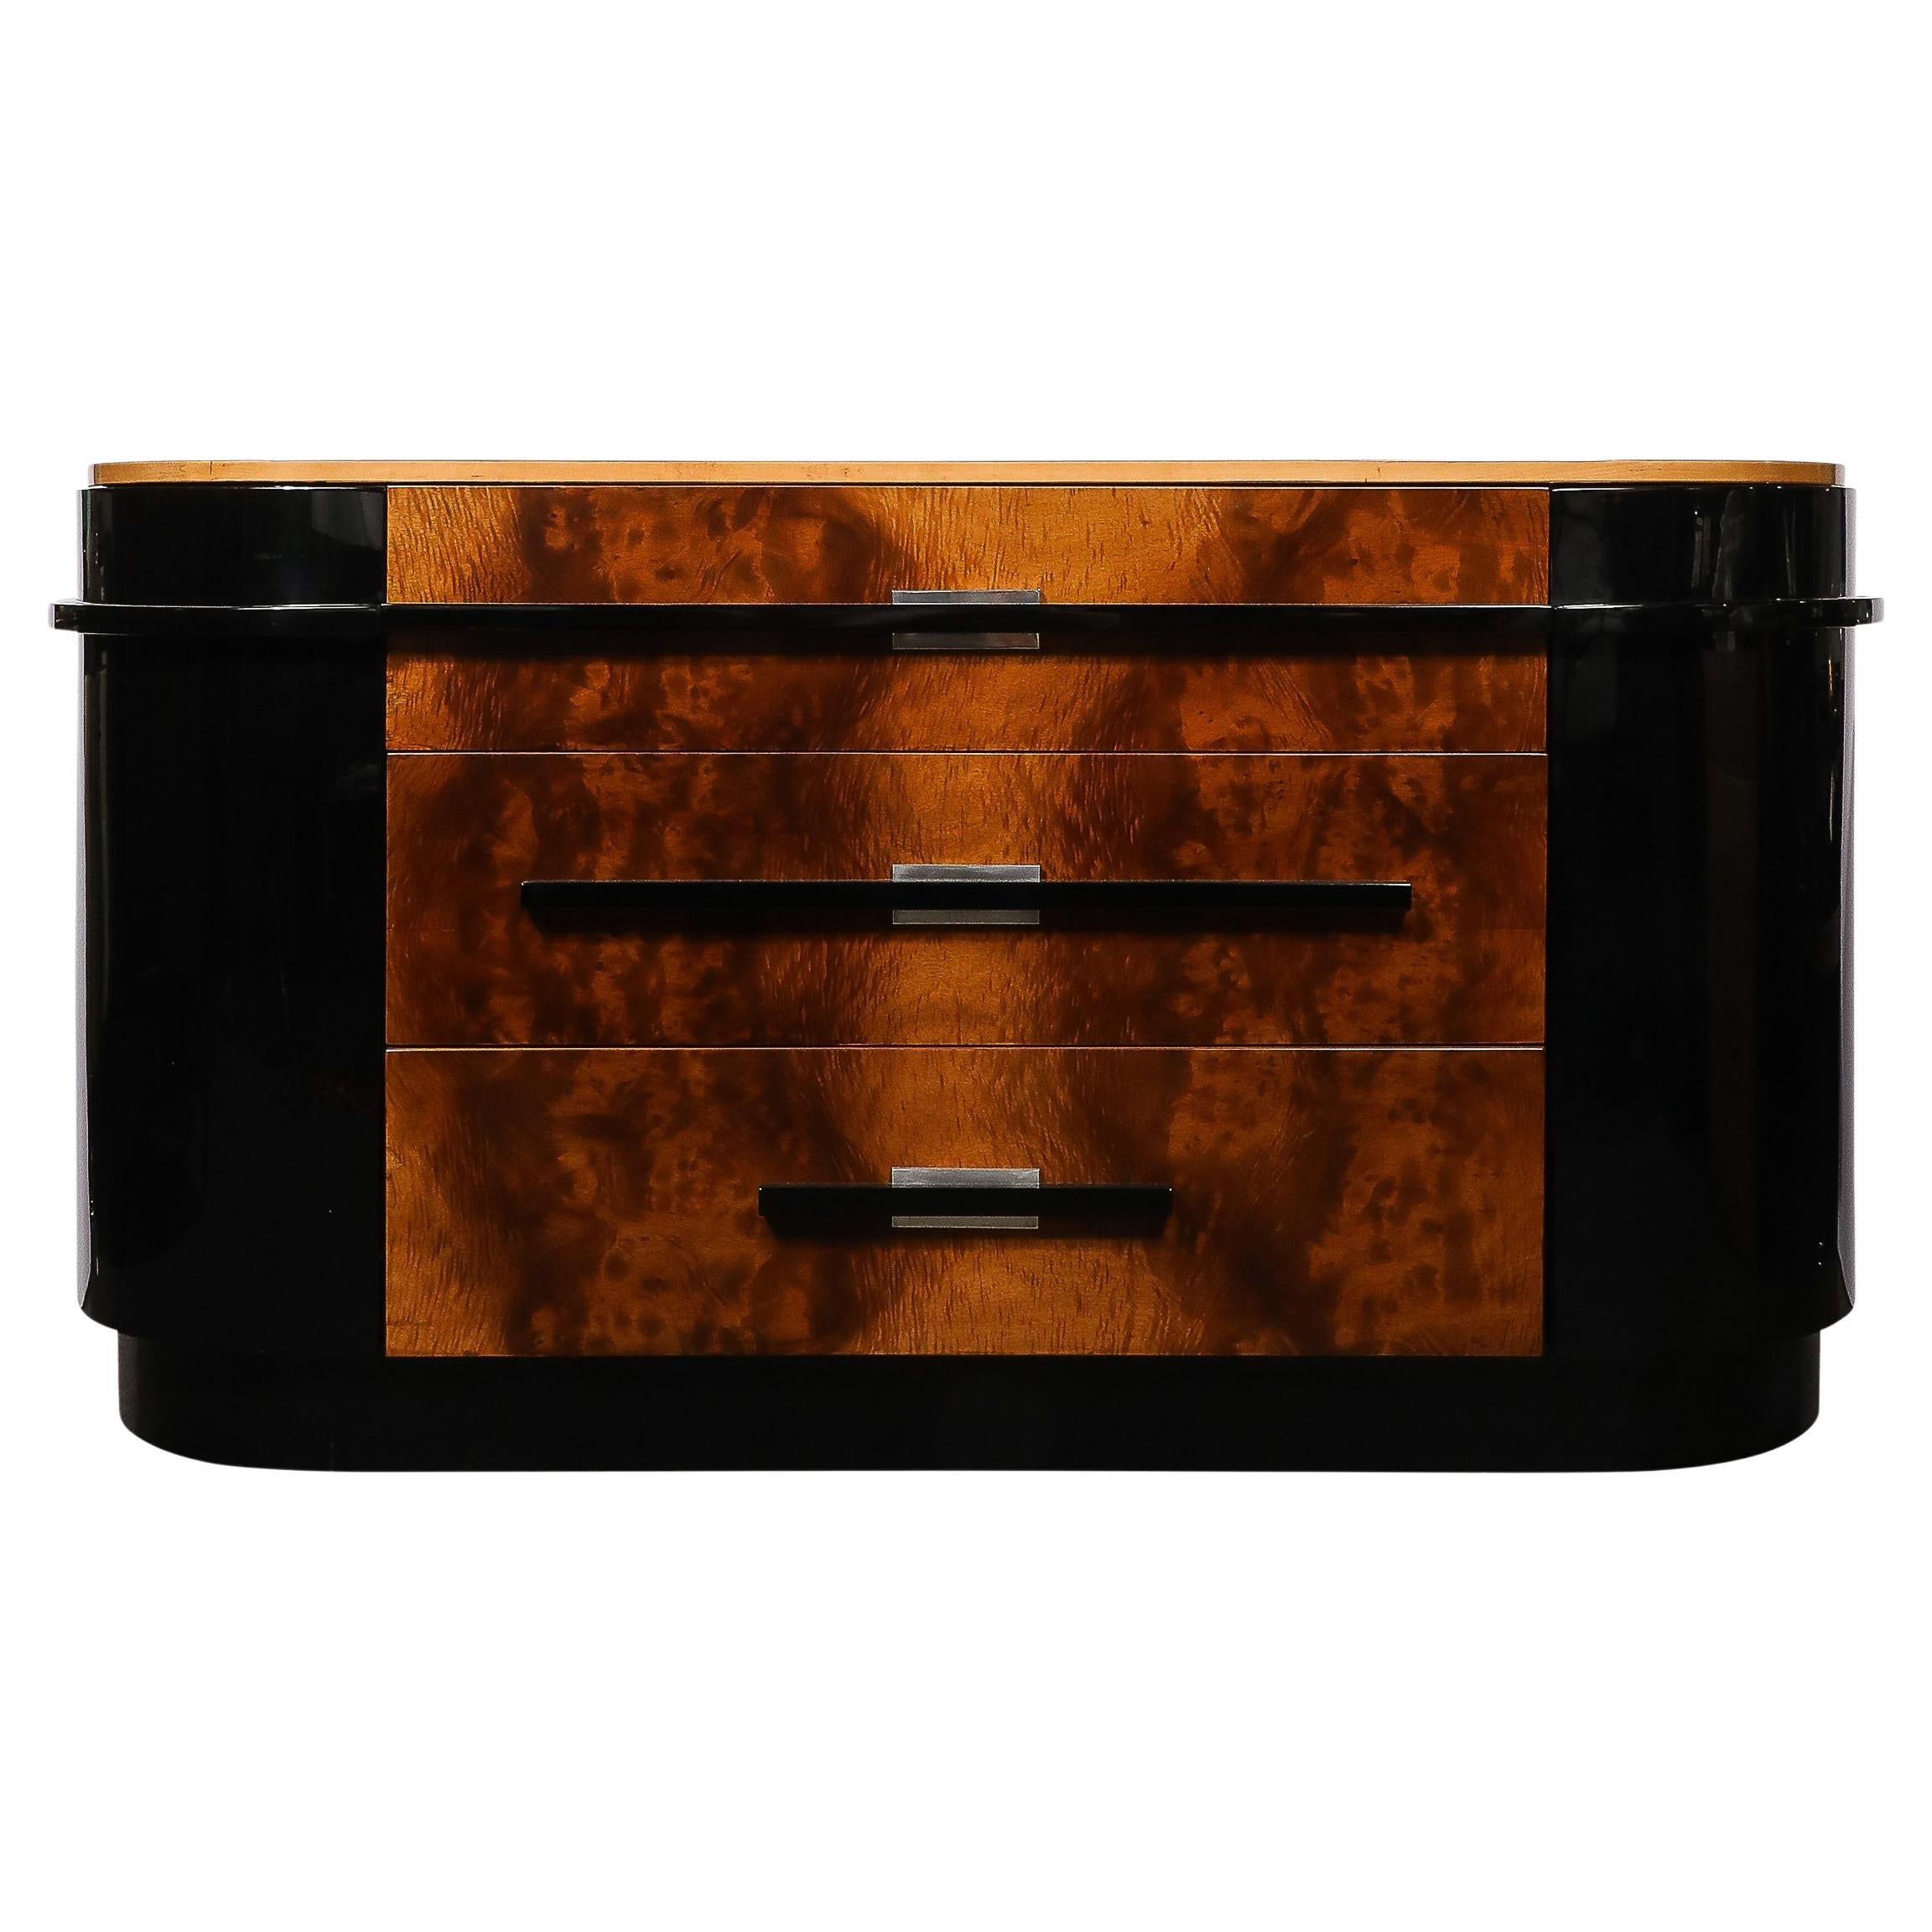 Art Deco Burled Walnut Sideboard by Donald Deskey for the Hastings Company